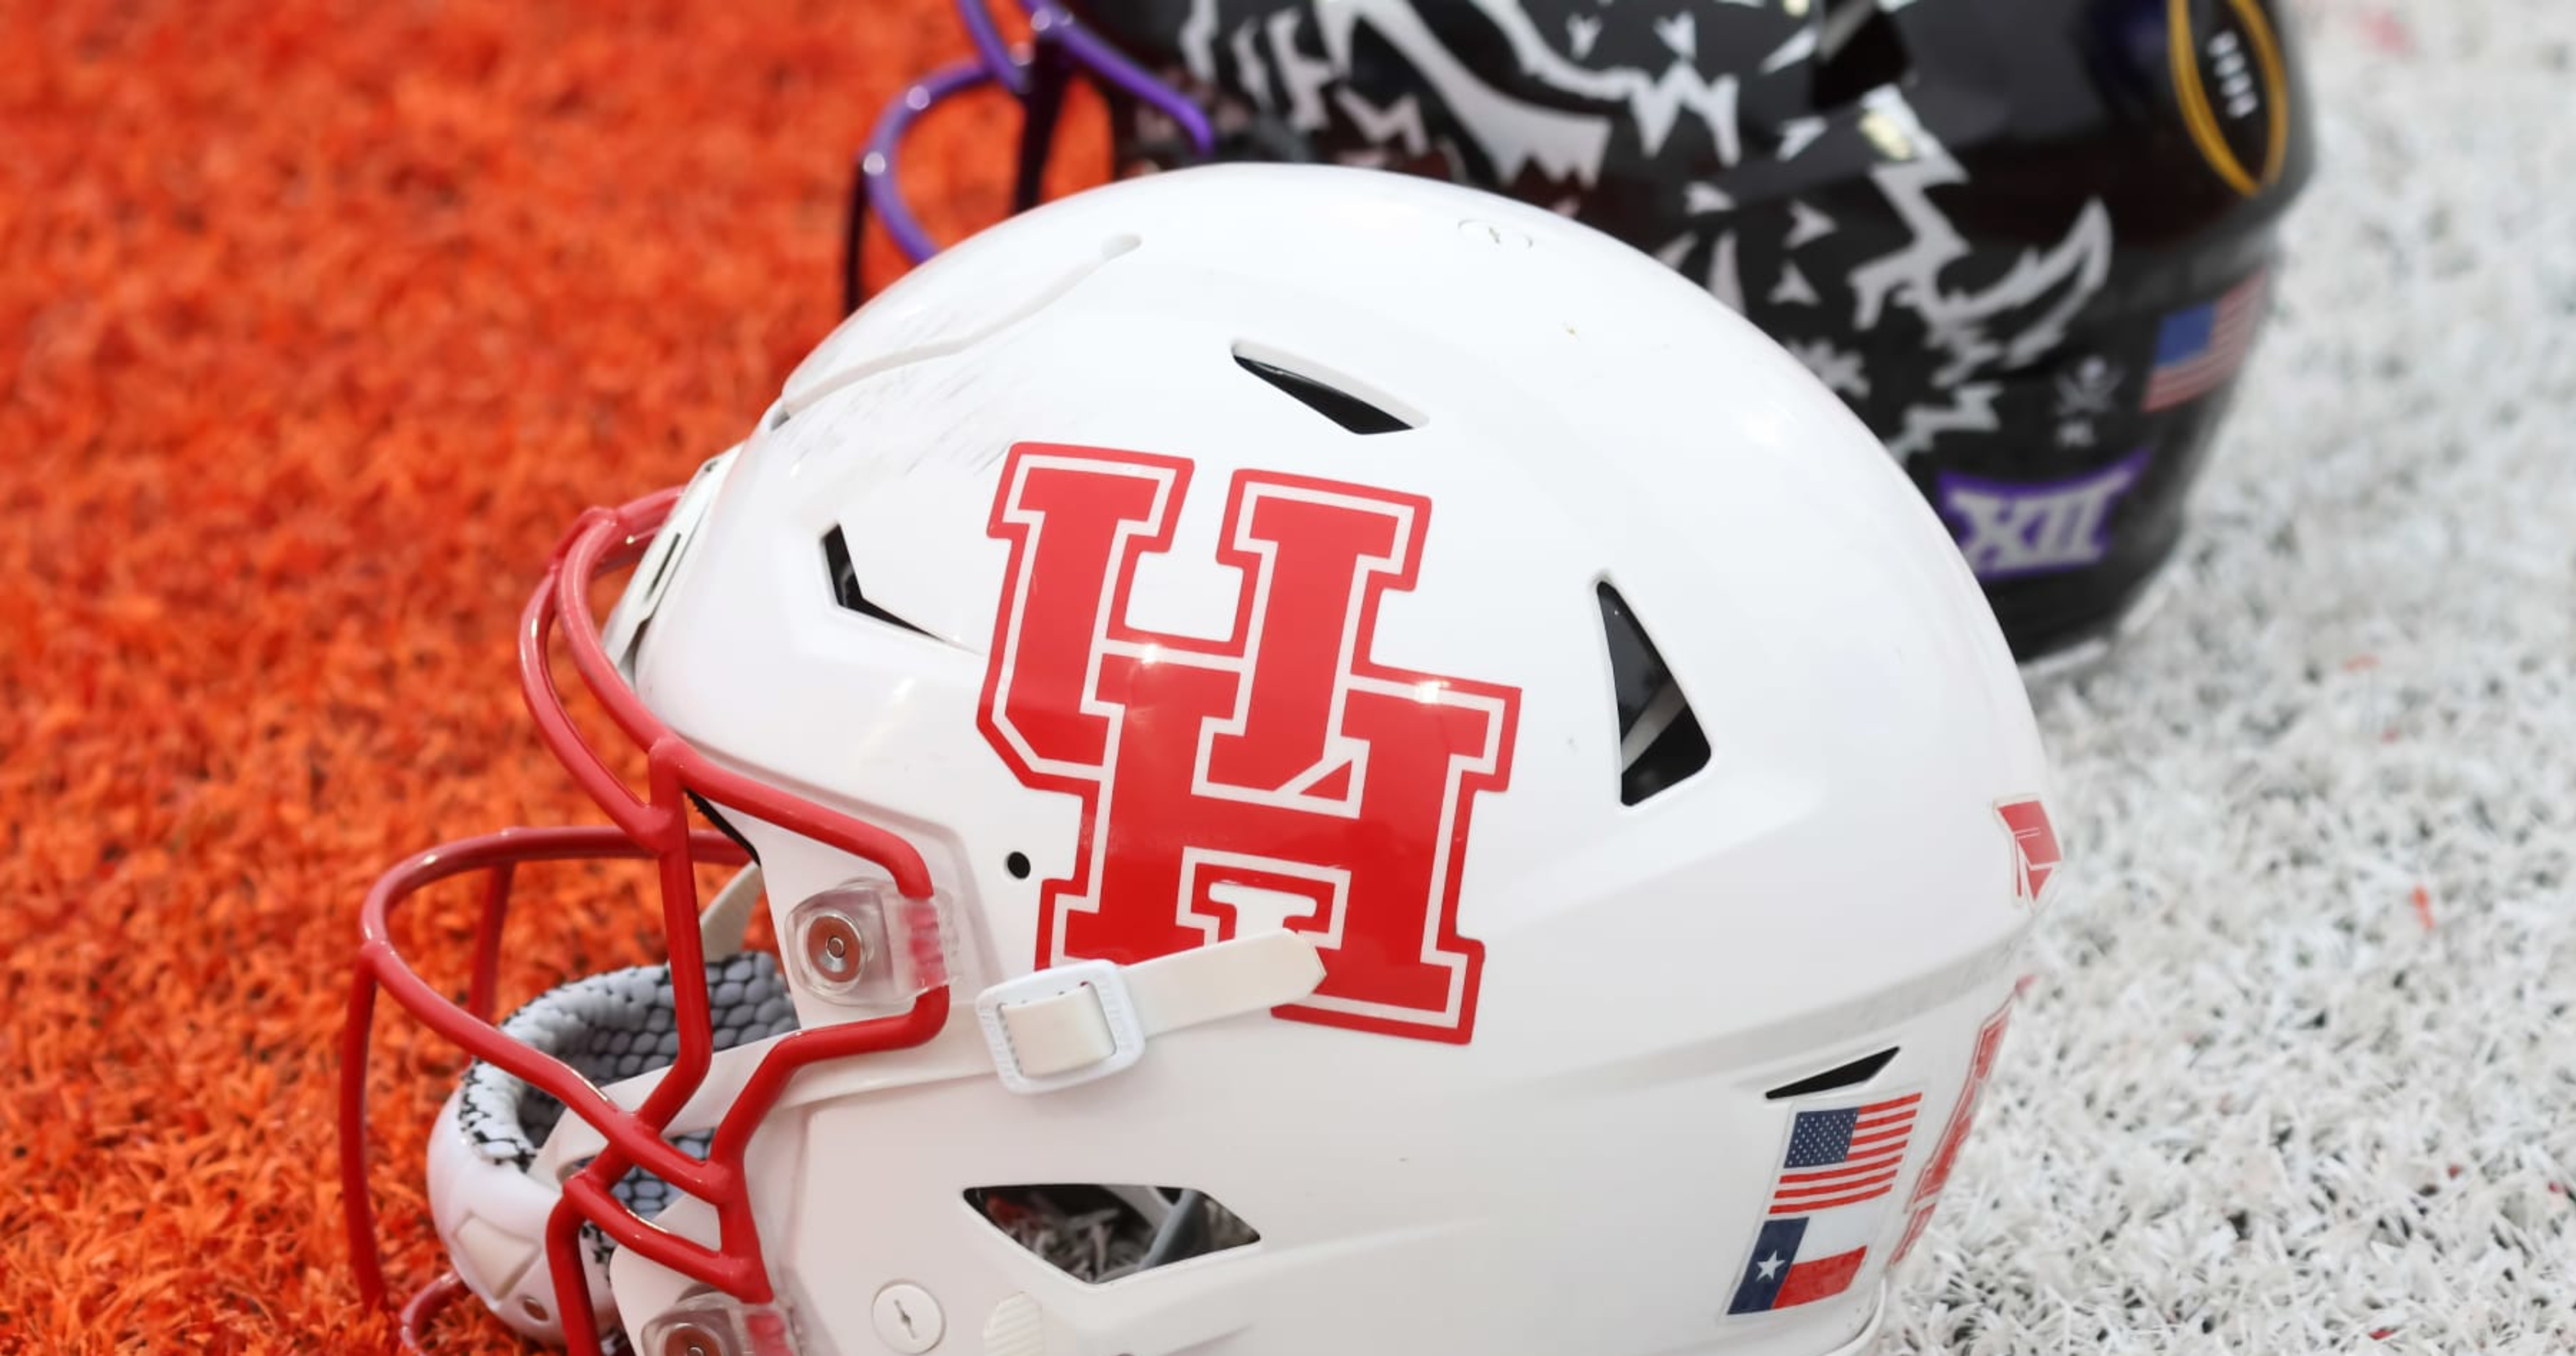 Houston Cougars Unveil Glorious Oilers-Themed Football Uniforms for Season  Opener - Sports Illustrated